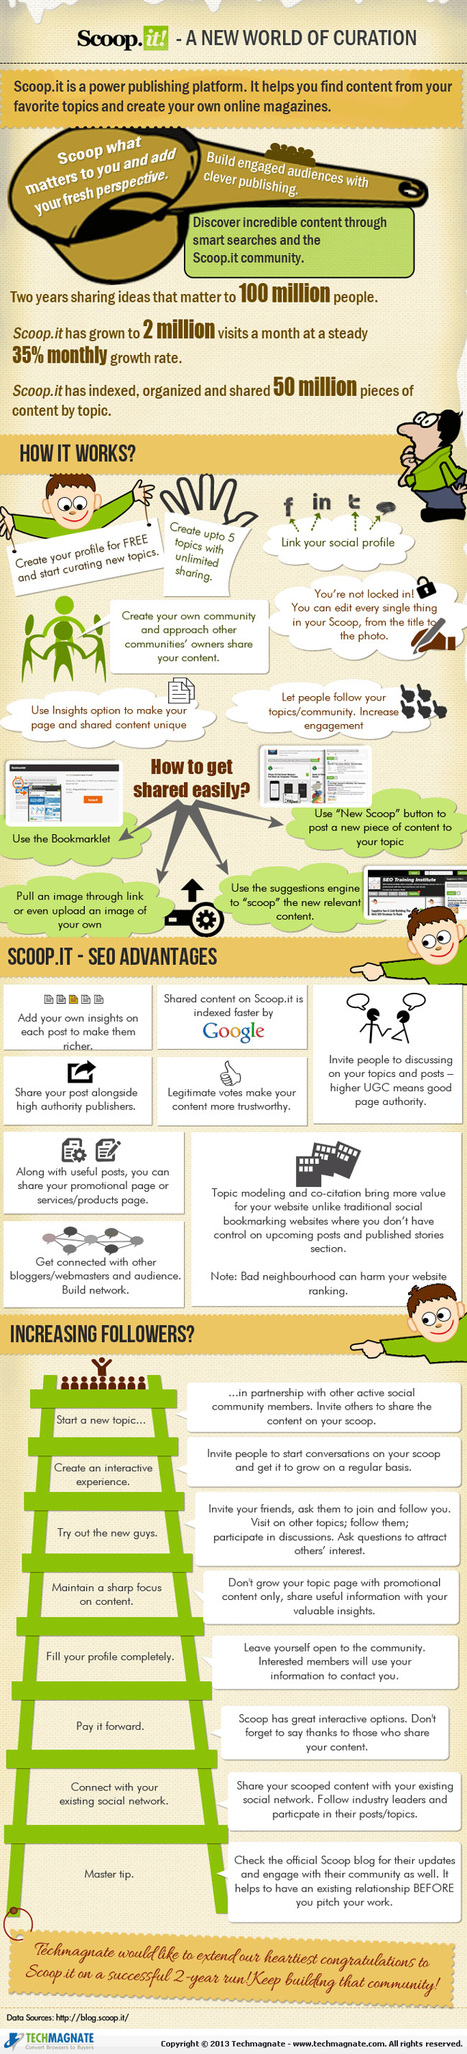 Scoop.It for SEO – A New World of Curation [Infographic] | Professional Learning for Busy Educators | Scoop.it